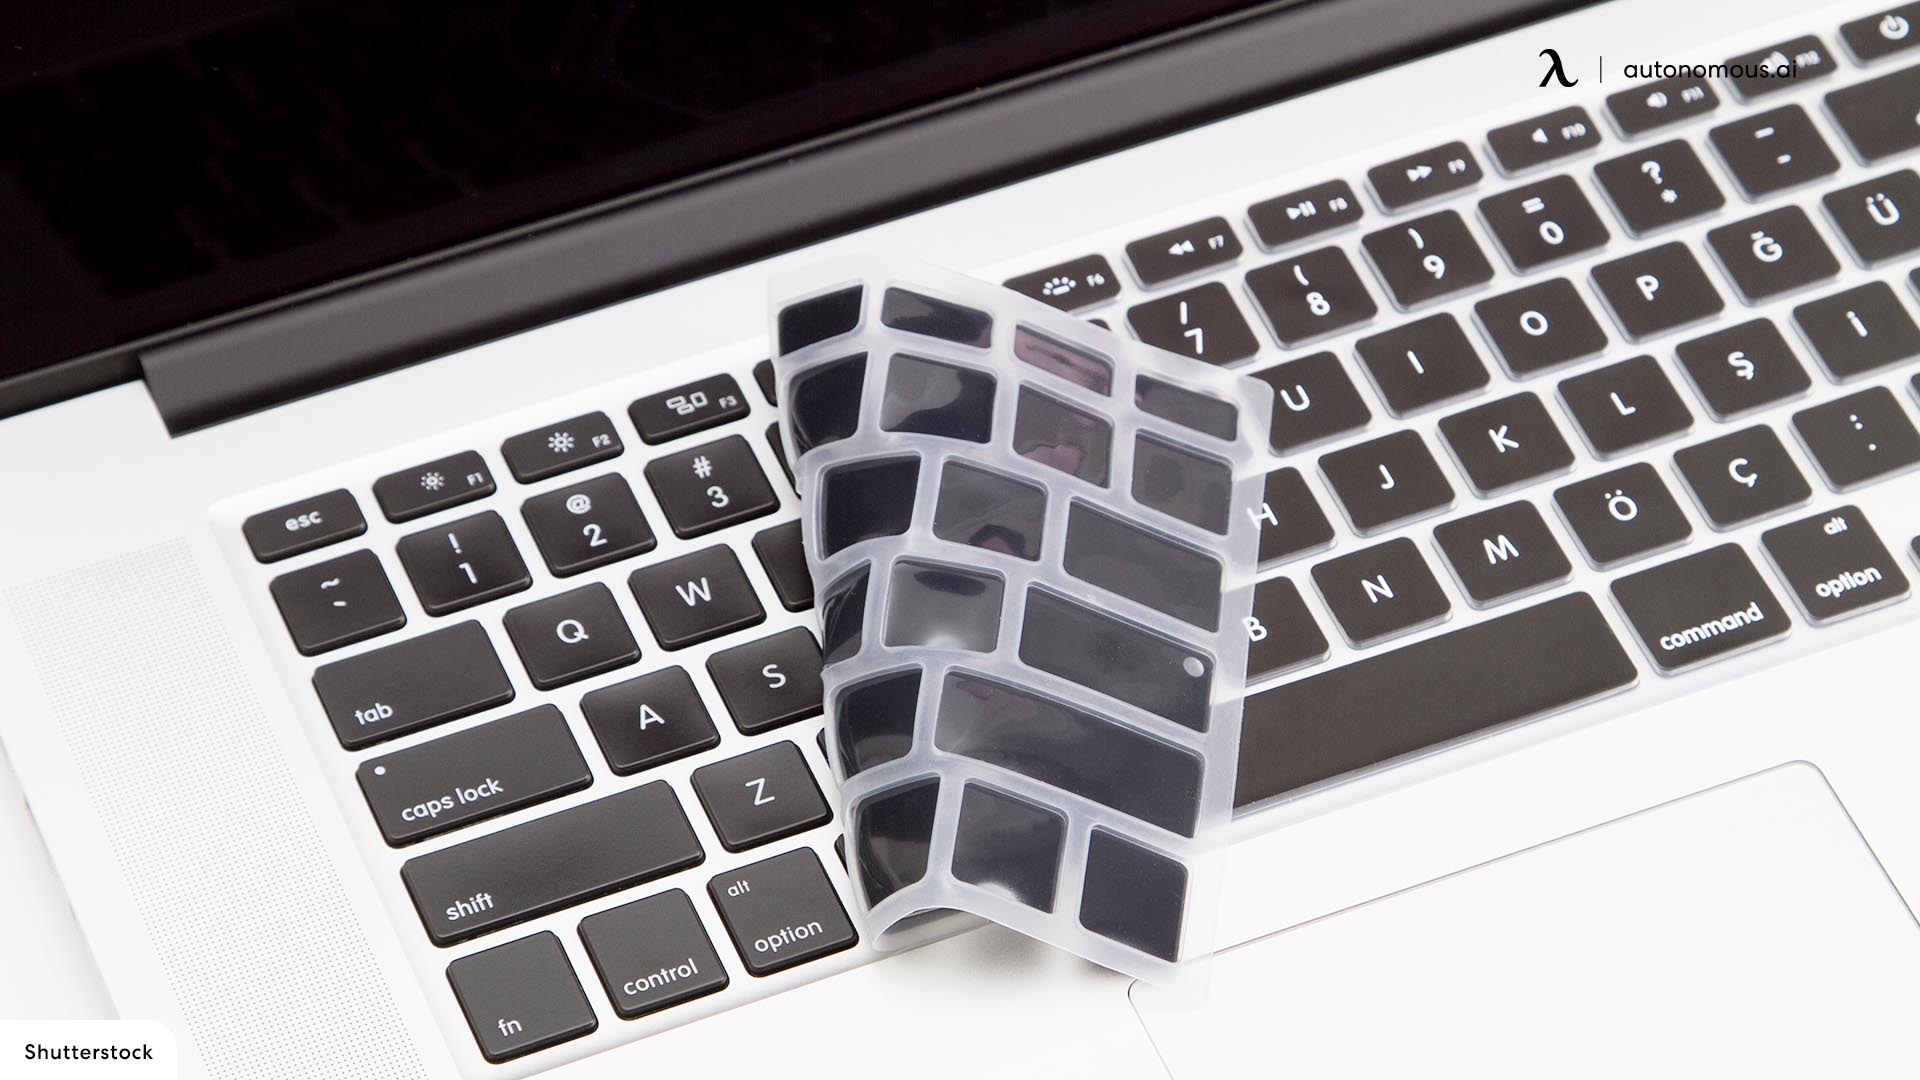 Keyboard Cover desk accessories for men